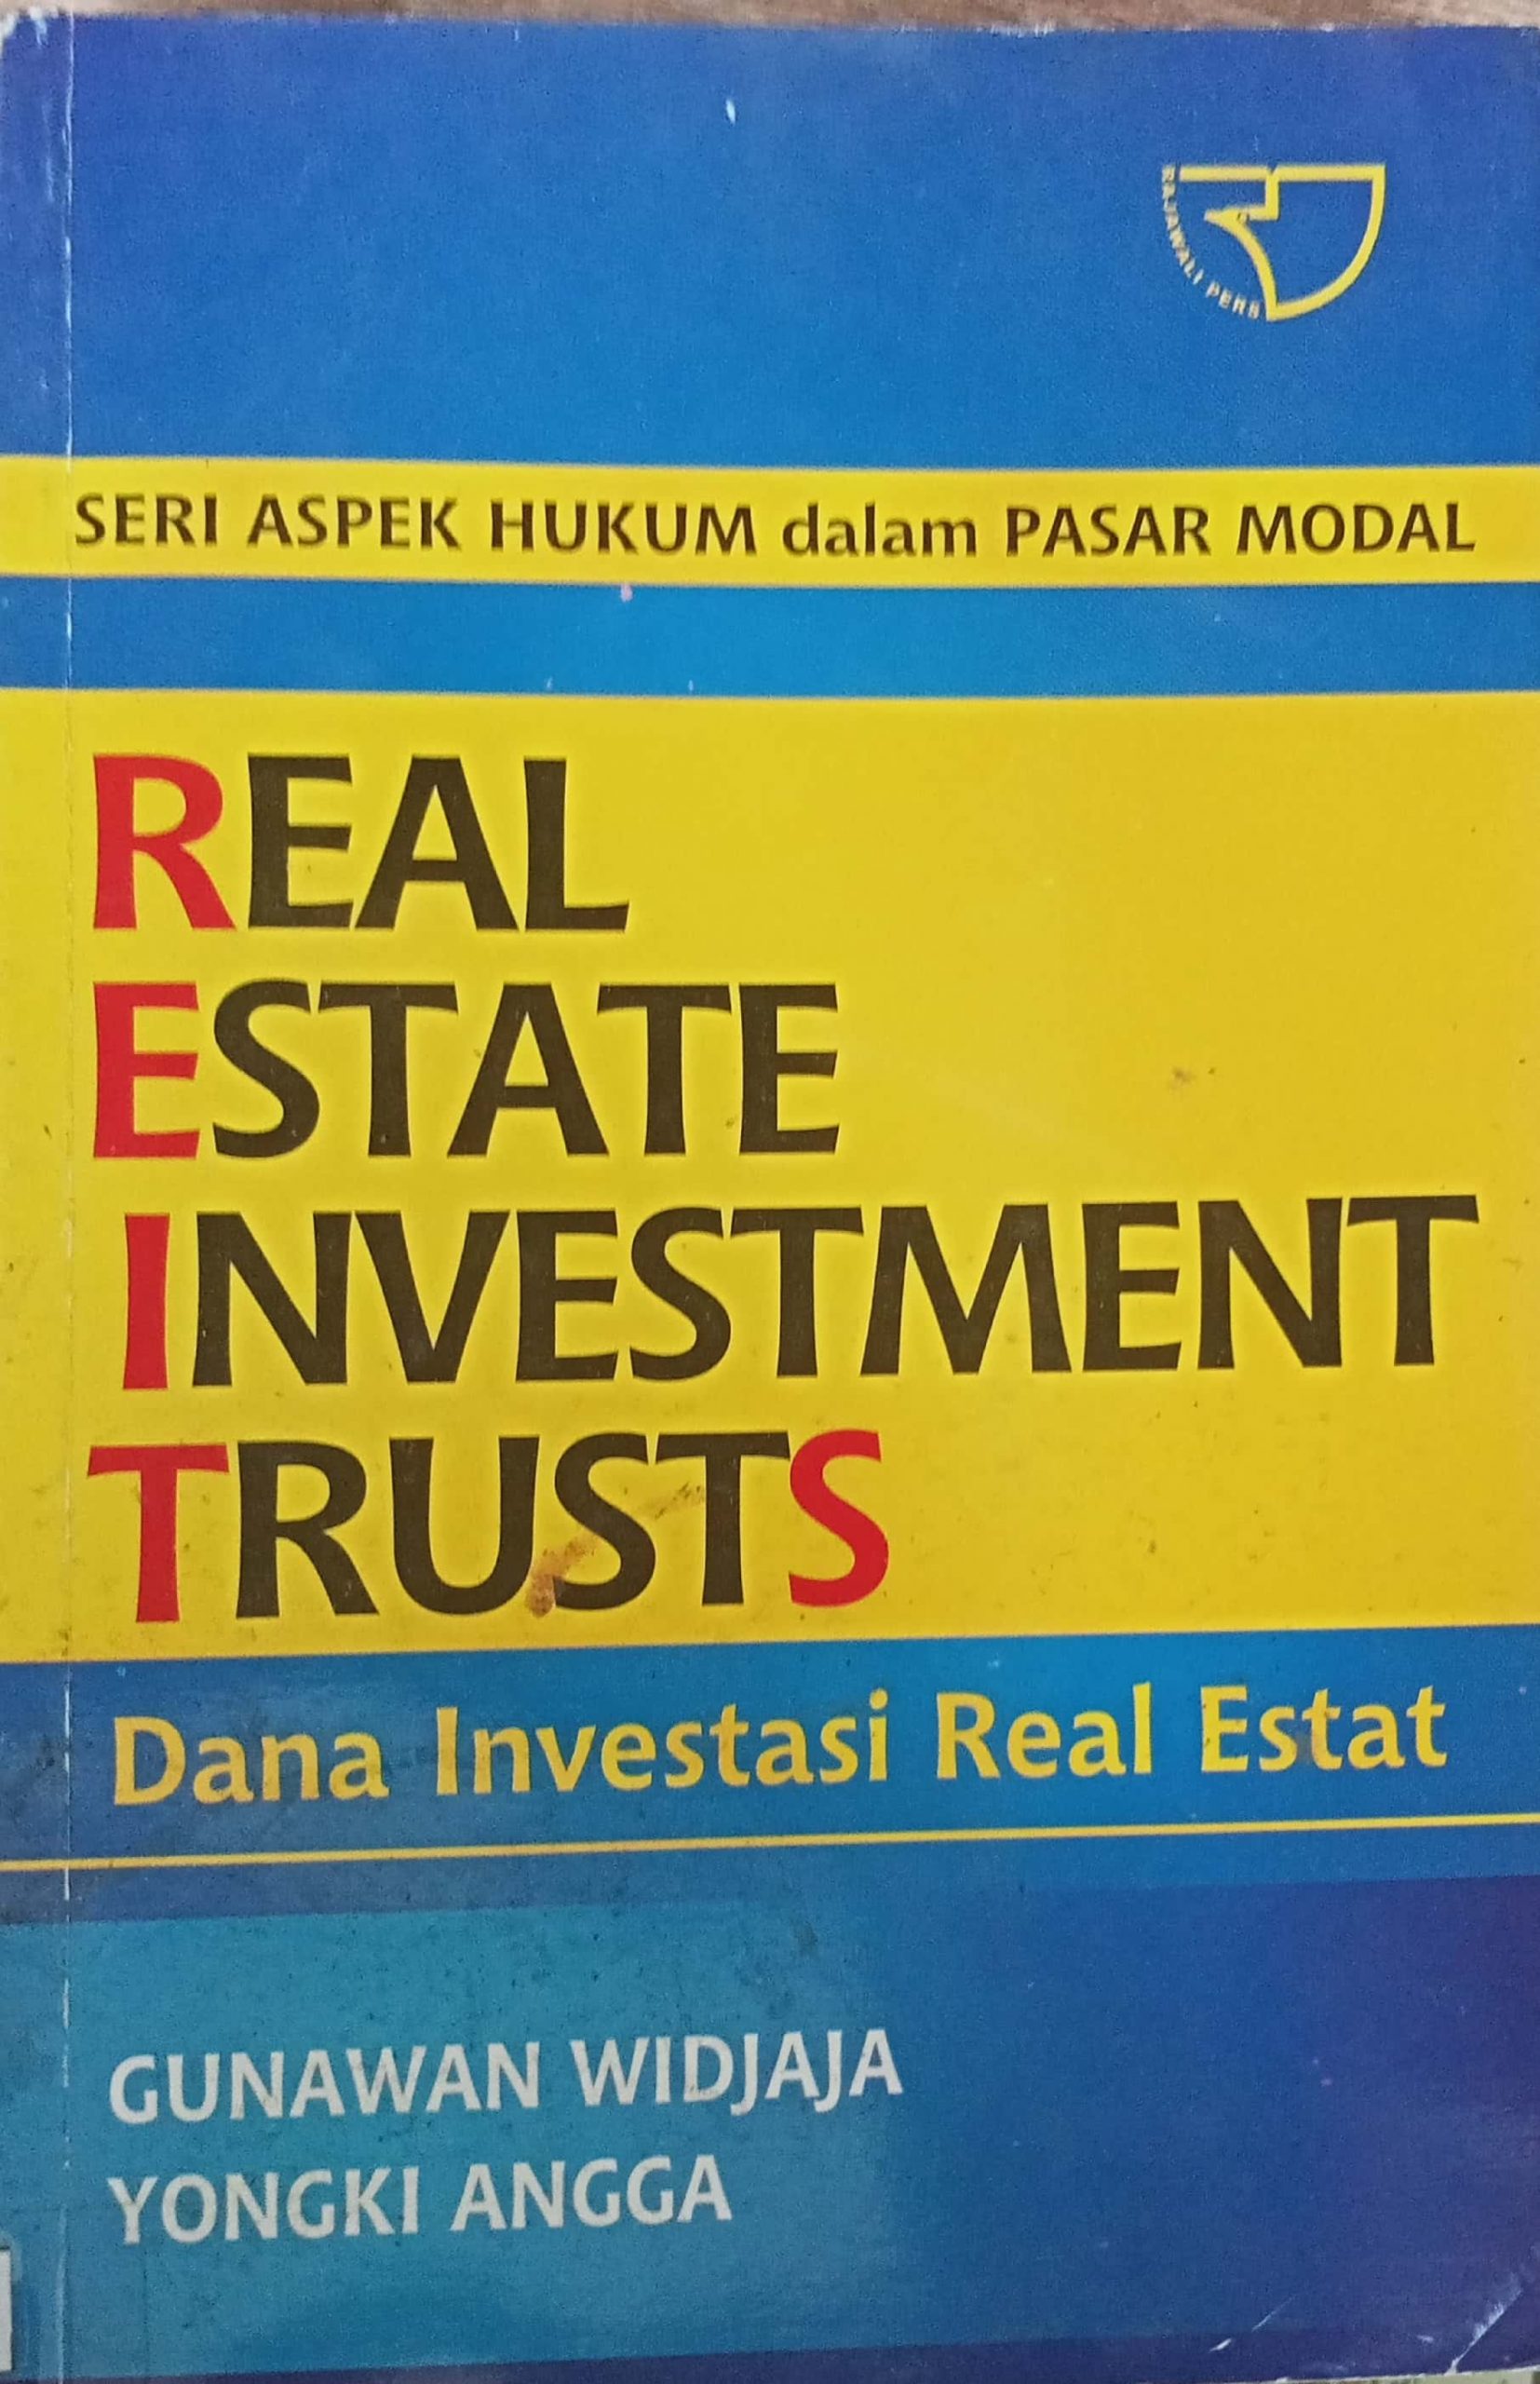 Real estate investiment trusts (REITs)